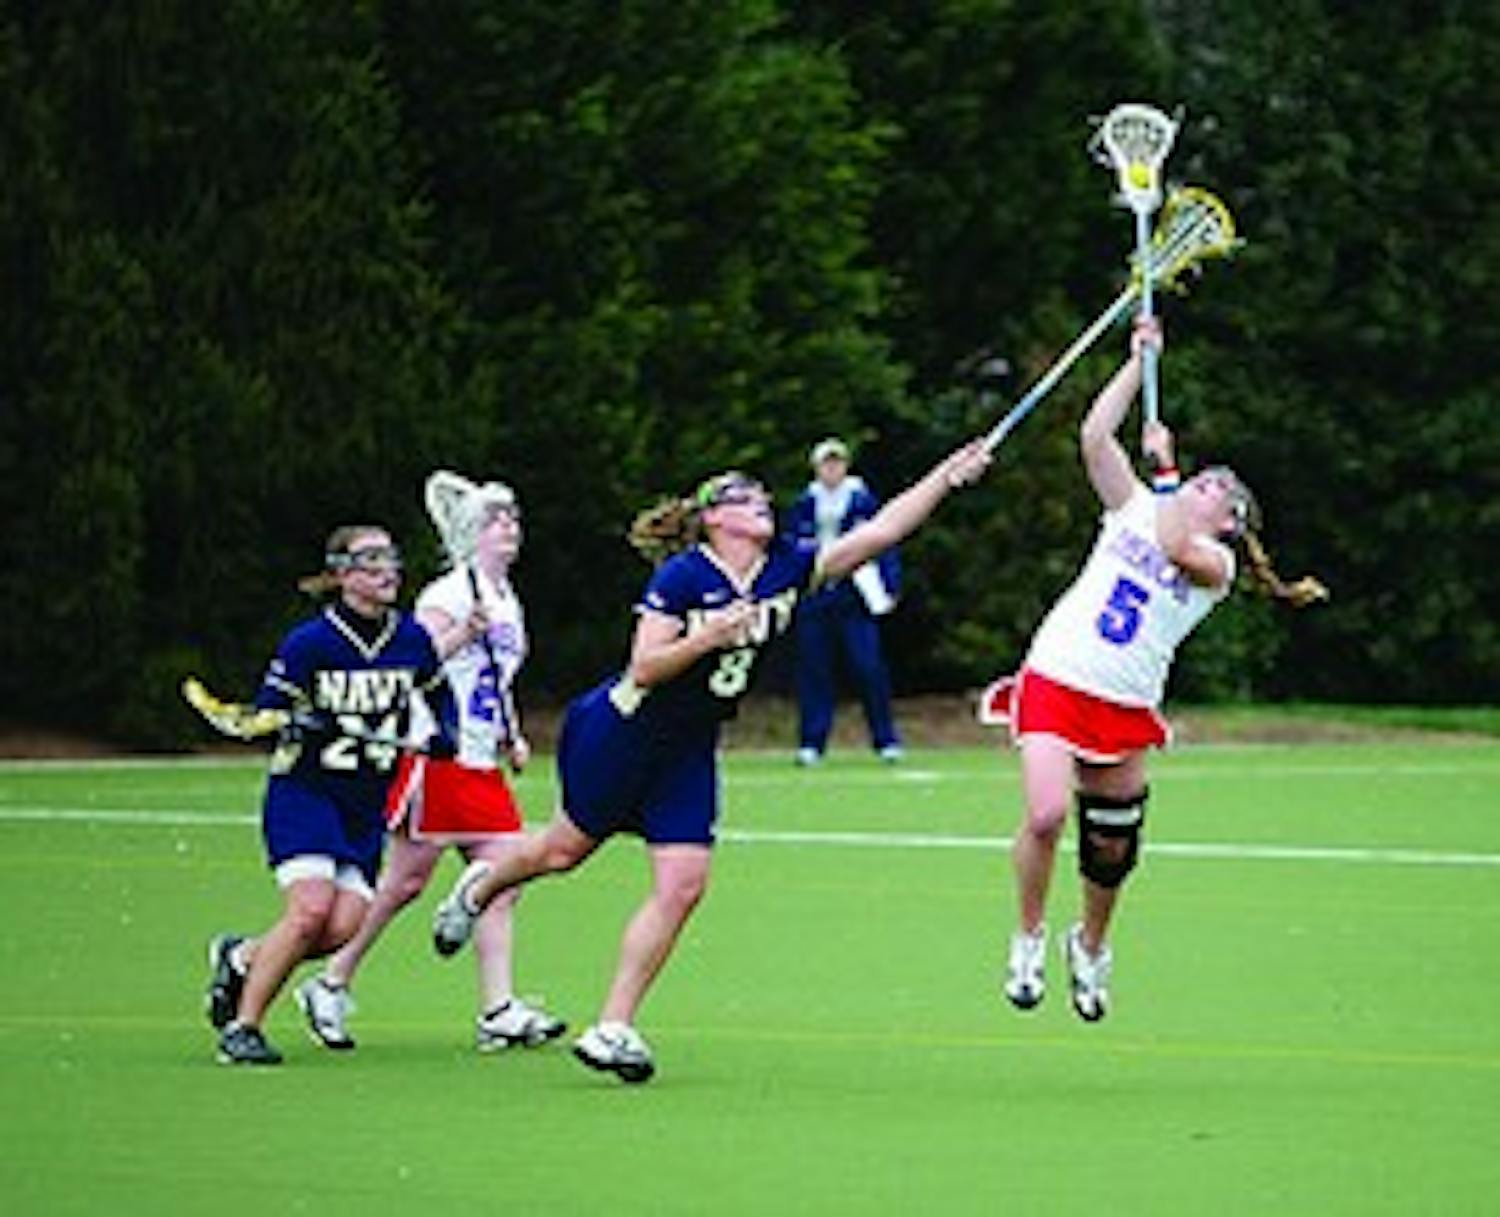 REACHING HIGH- Senior midfielder Leslie Fischer leaps up to steal the ball from her Navy opponent.